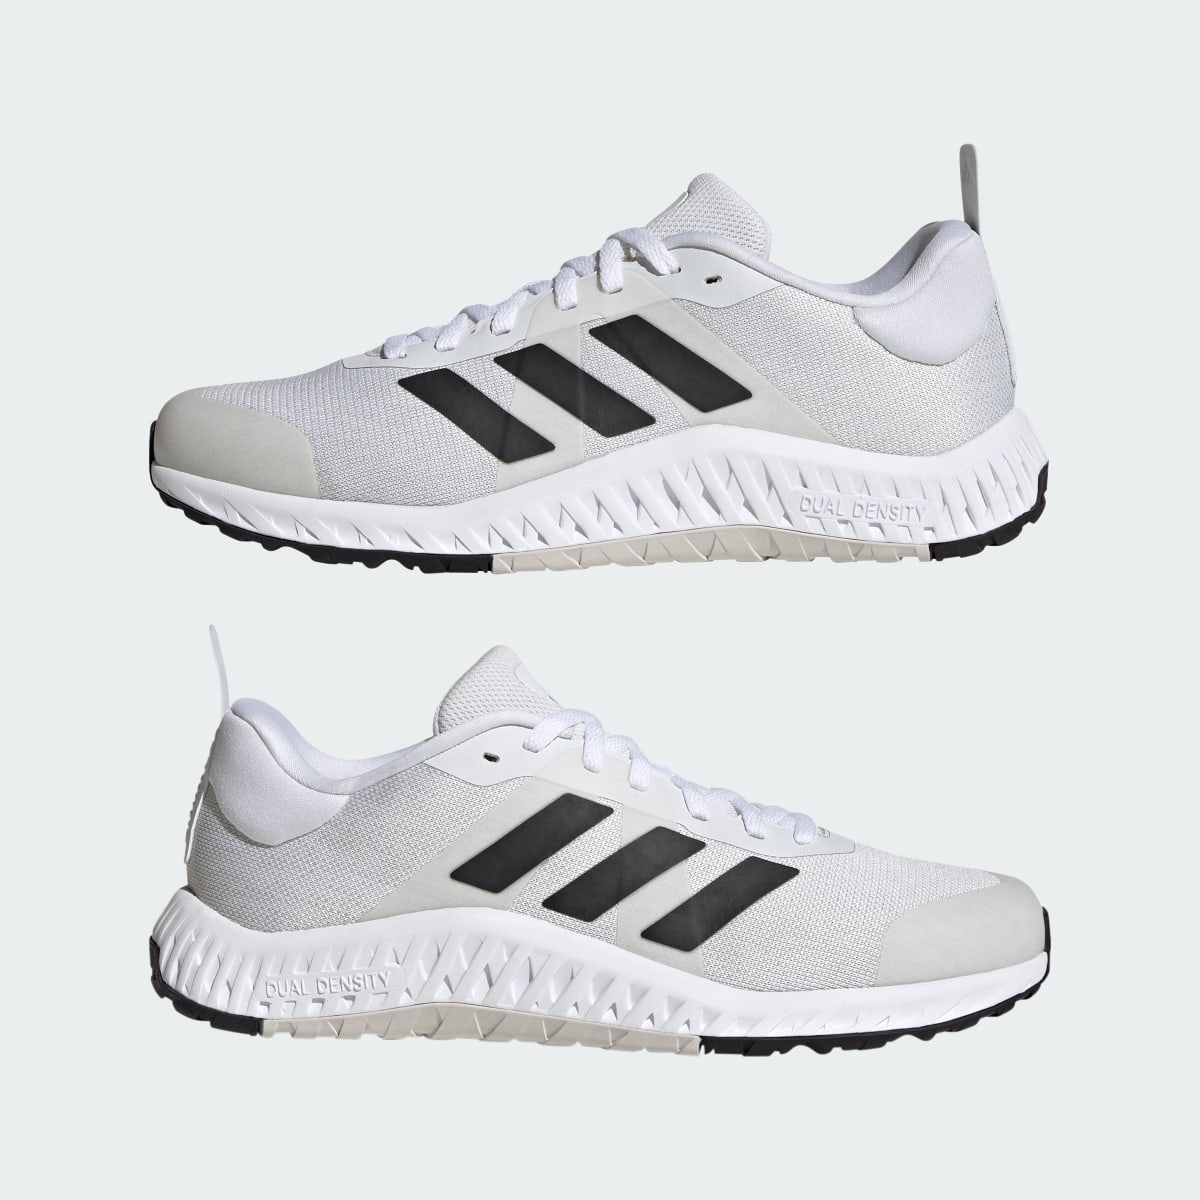 Adidas Everyset Trainer Shoes. 8